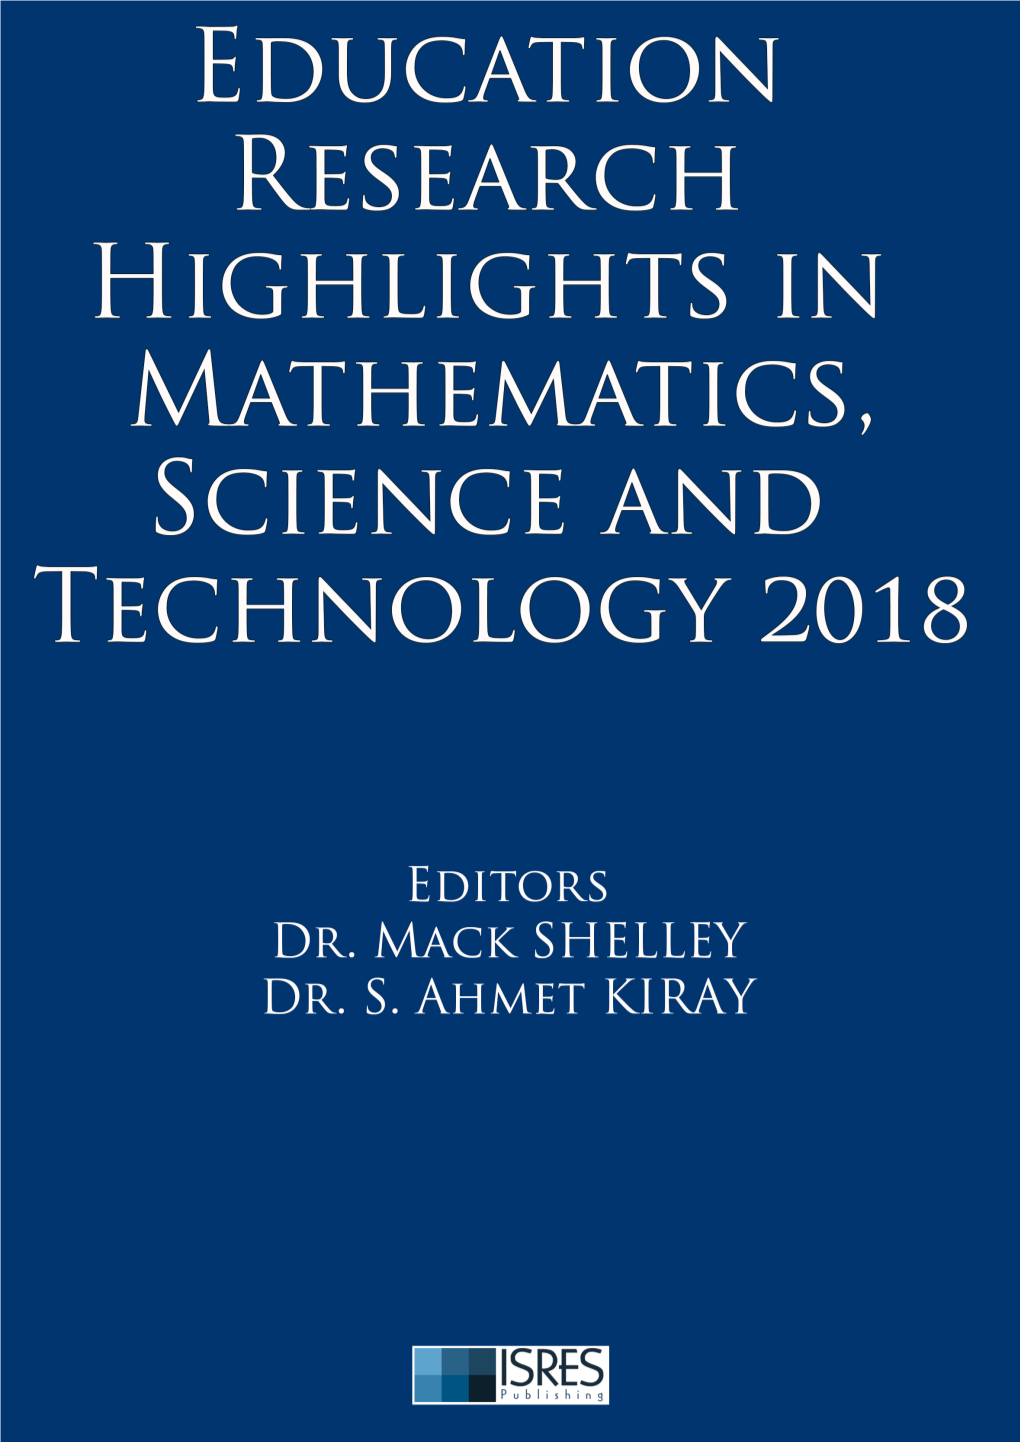 Education Research Highlights in Mathematics, Science and Technology 2018